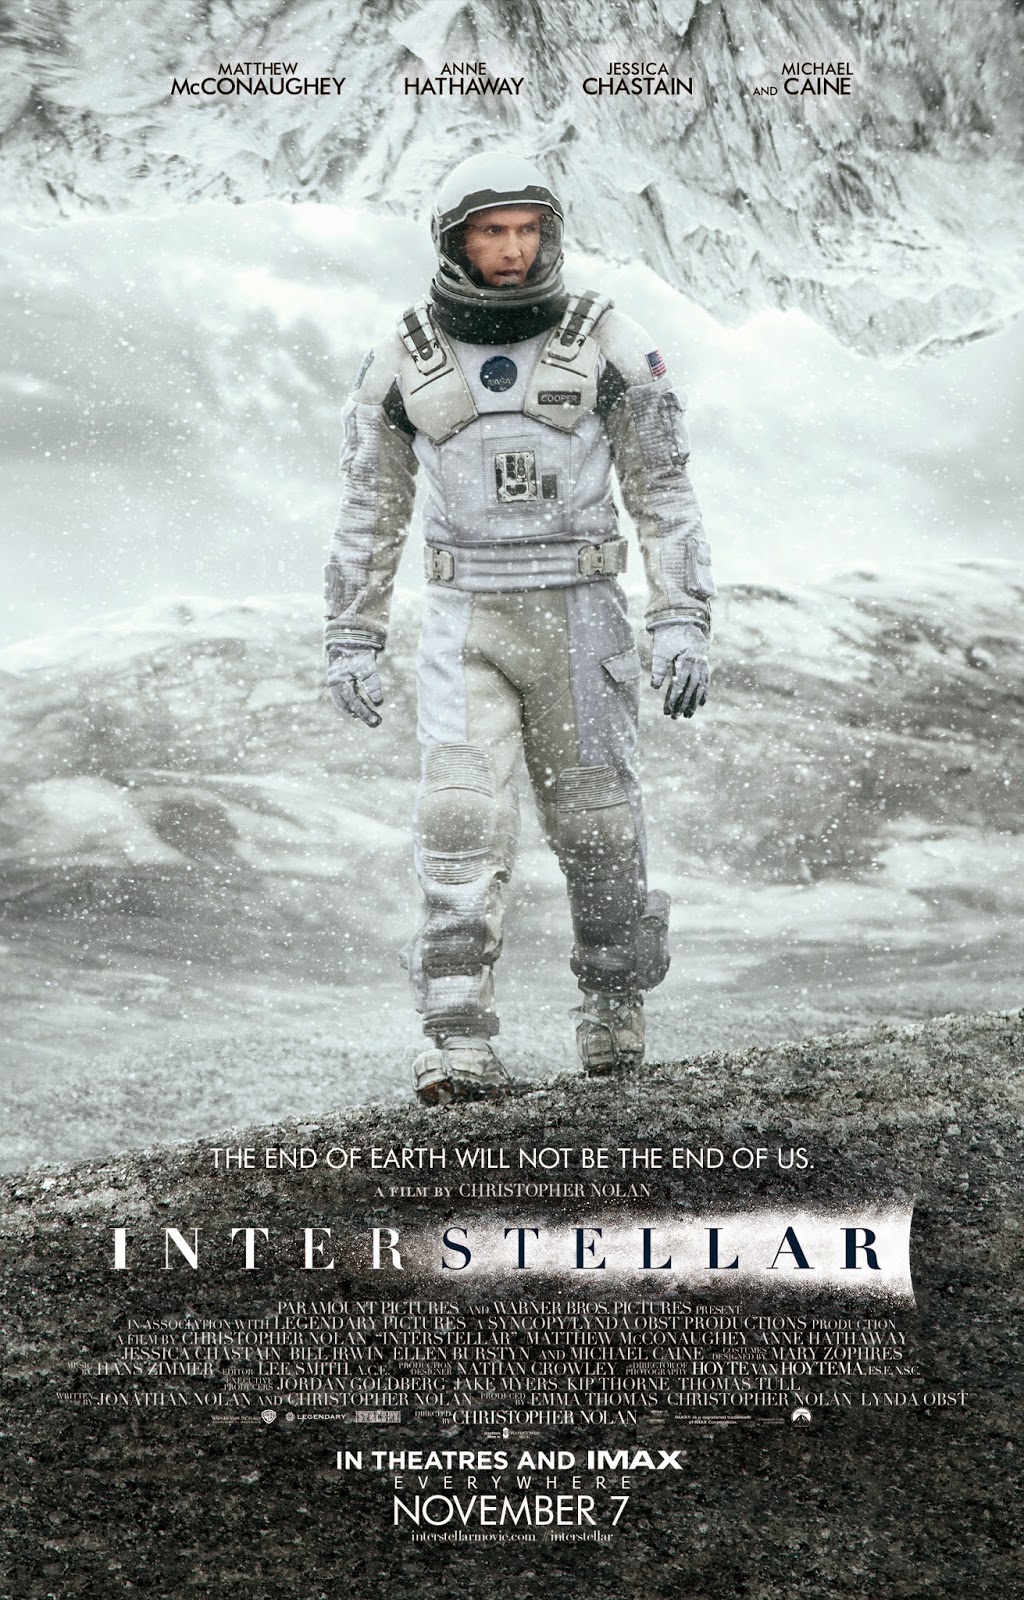 Allie's Entertainment Blog Check Out "INTERSTELLAR" Poster Debut And